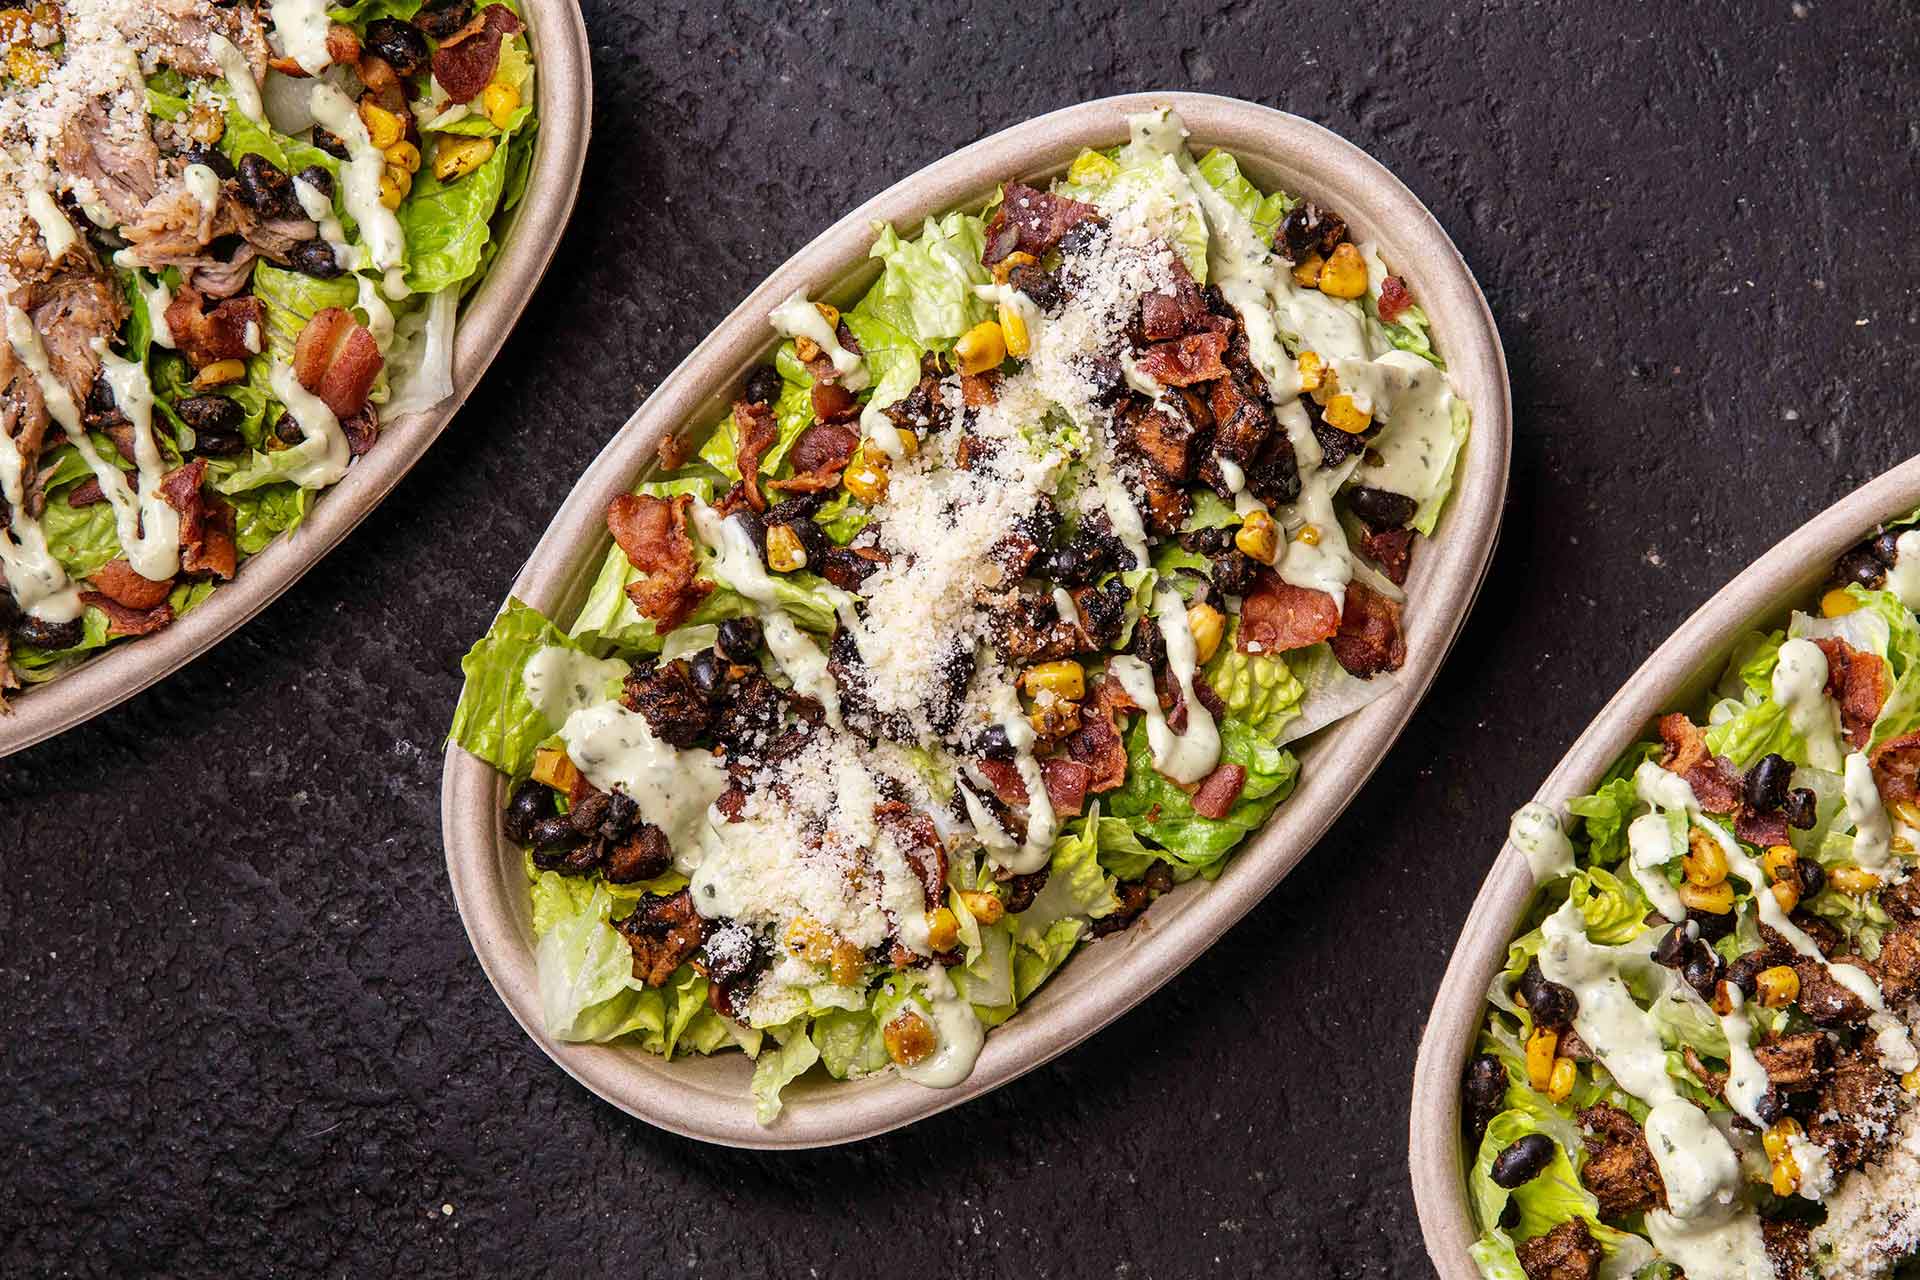 Mexi-Cobb Salad - Bed of Romaine Lettuce, Black Beans, Corn, Pico de Gallo, Crumbled Cotija, Masa Crutons, Avocado Ranch, and Your Choice of Filling.